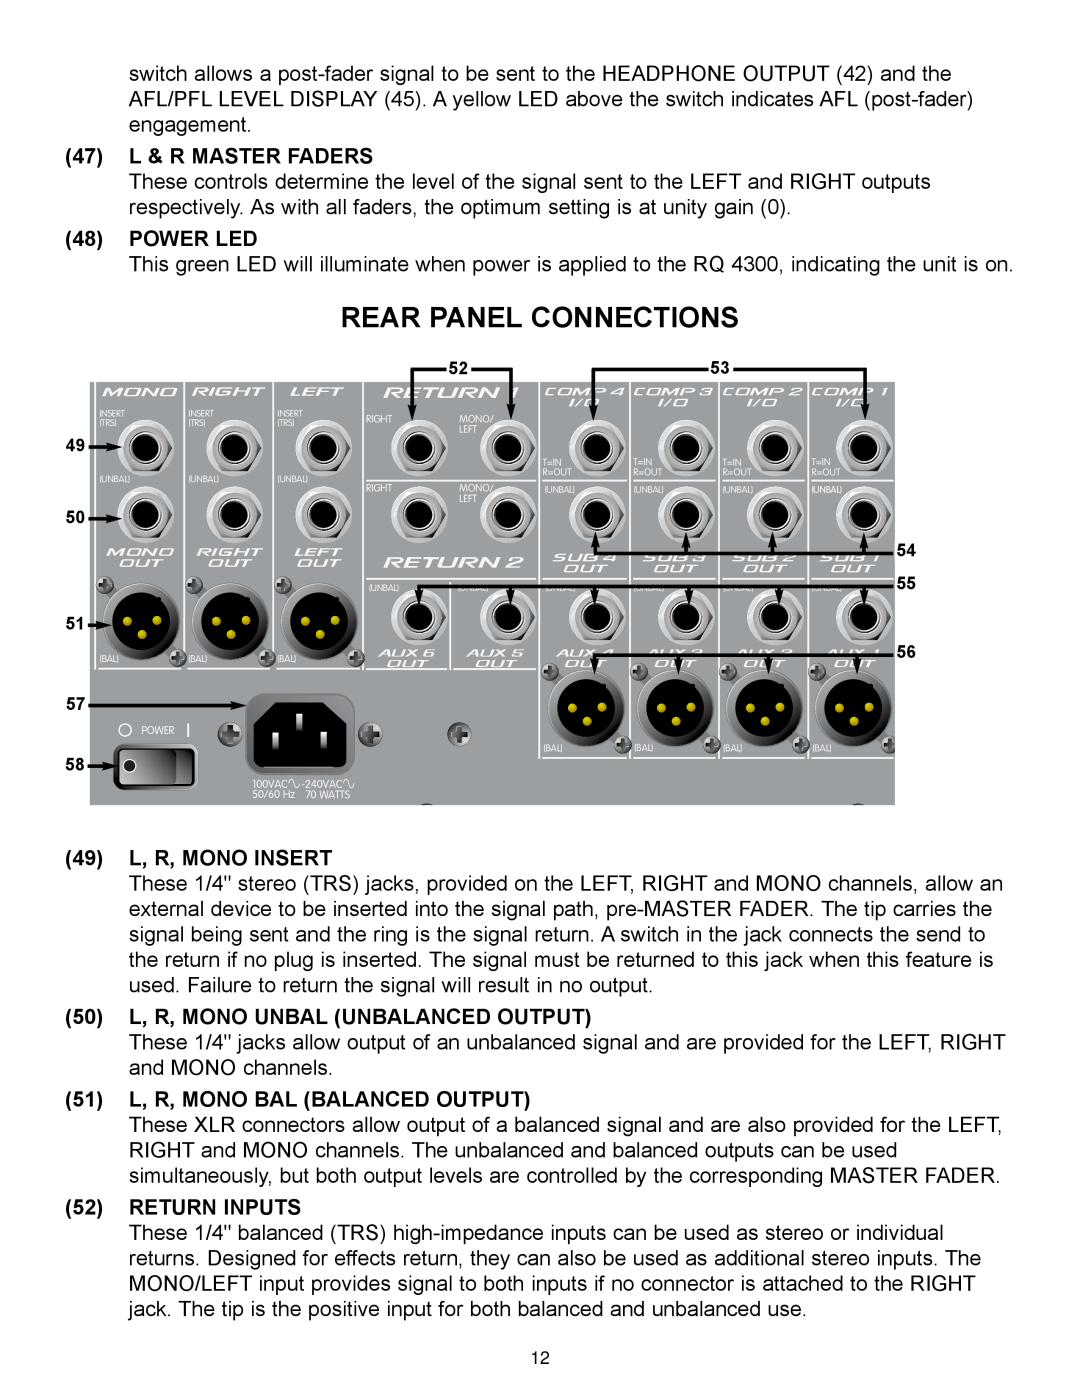 Peavey RQ 4300 Series manual Rear Panel Connections, 47 L & R MASTER FADERS, Power Led, 49 L, R, MONO INSERT, Return Inputs 